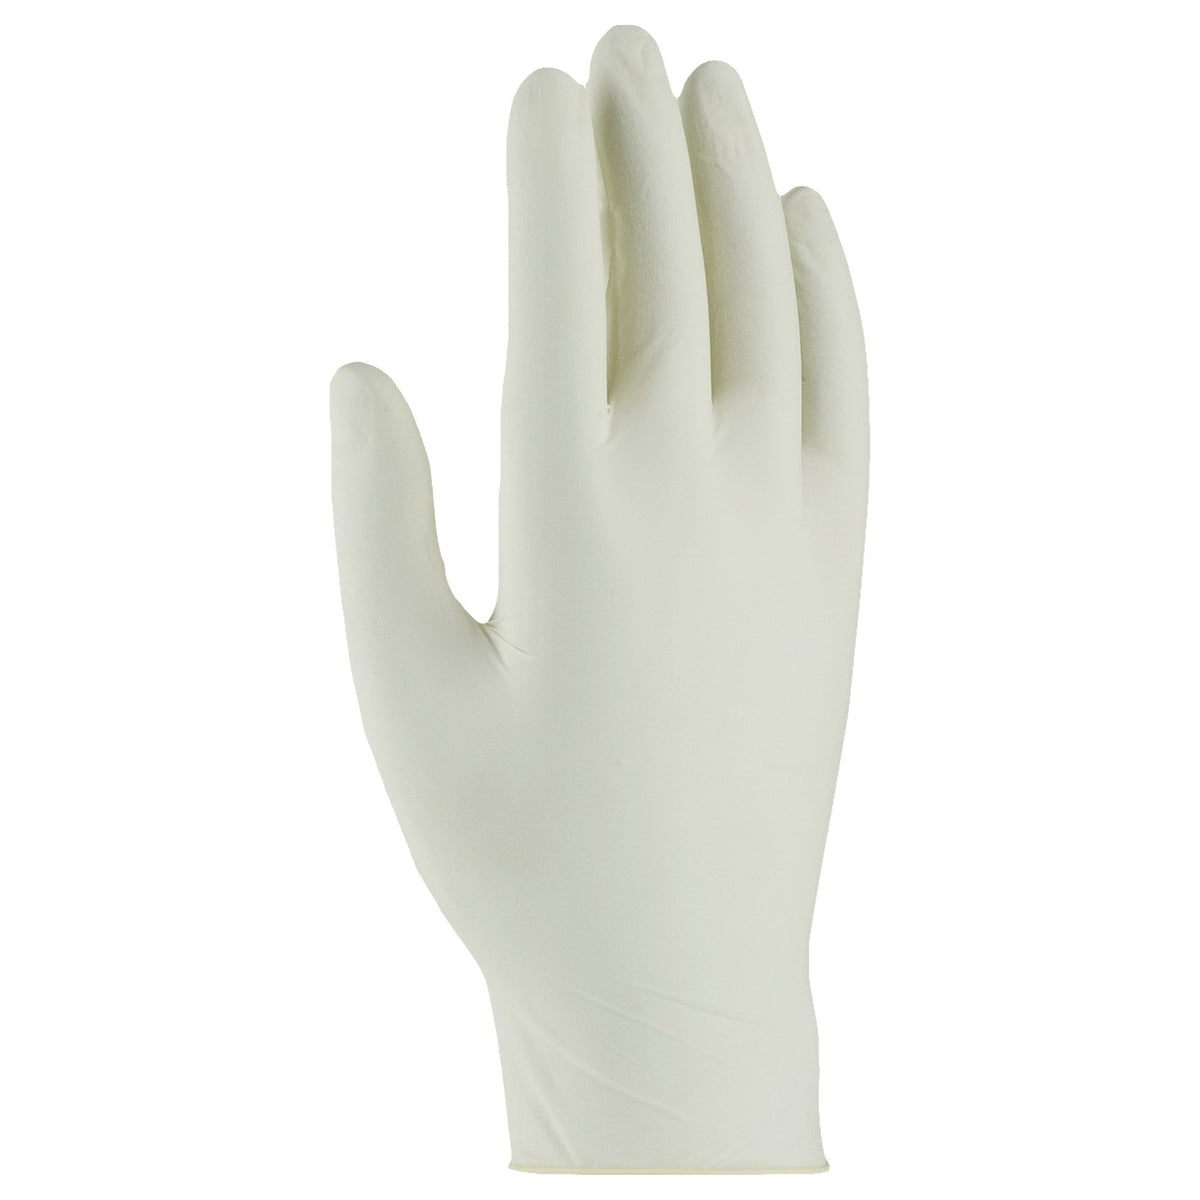 Disposable Latex Gloves with Powder - 5 Mil. 1BOX/100GLOVES - 10 Boxes